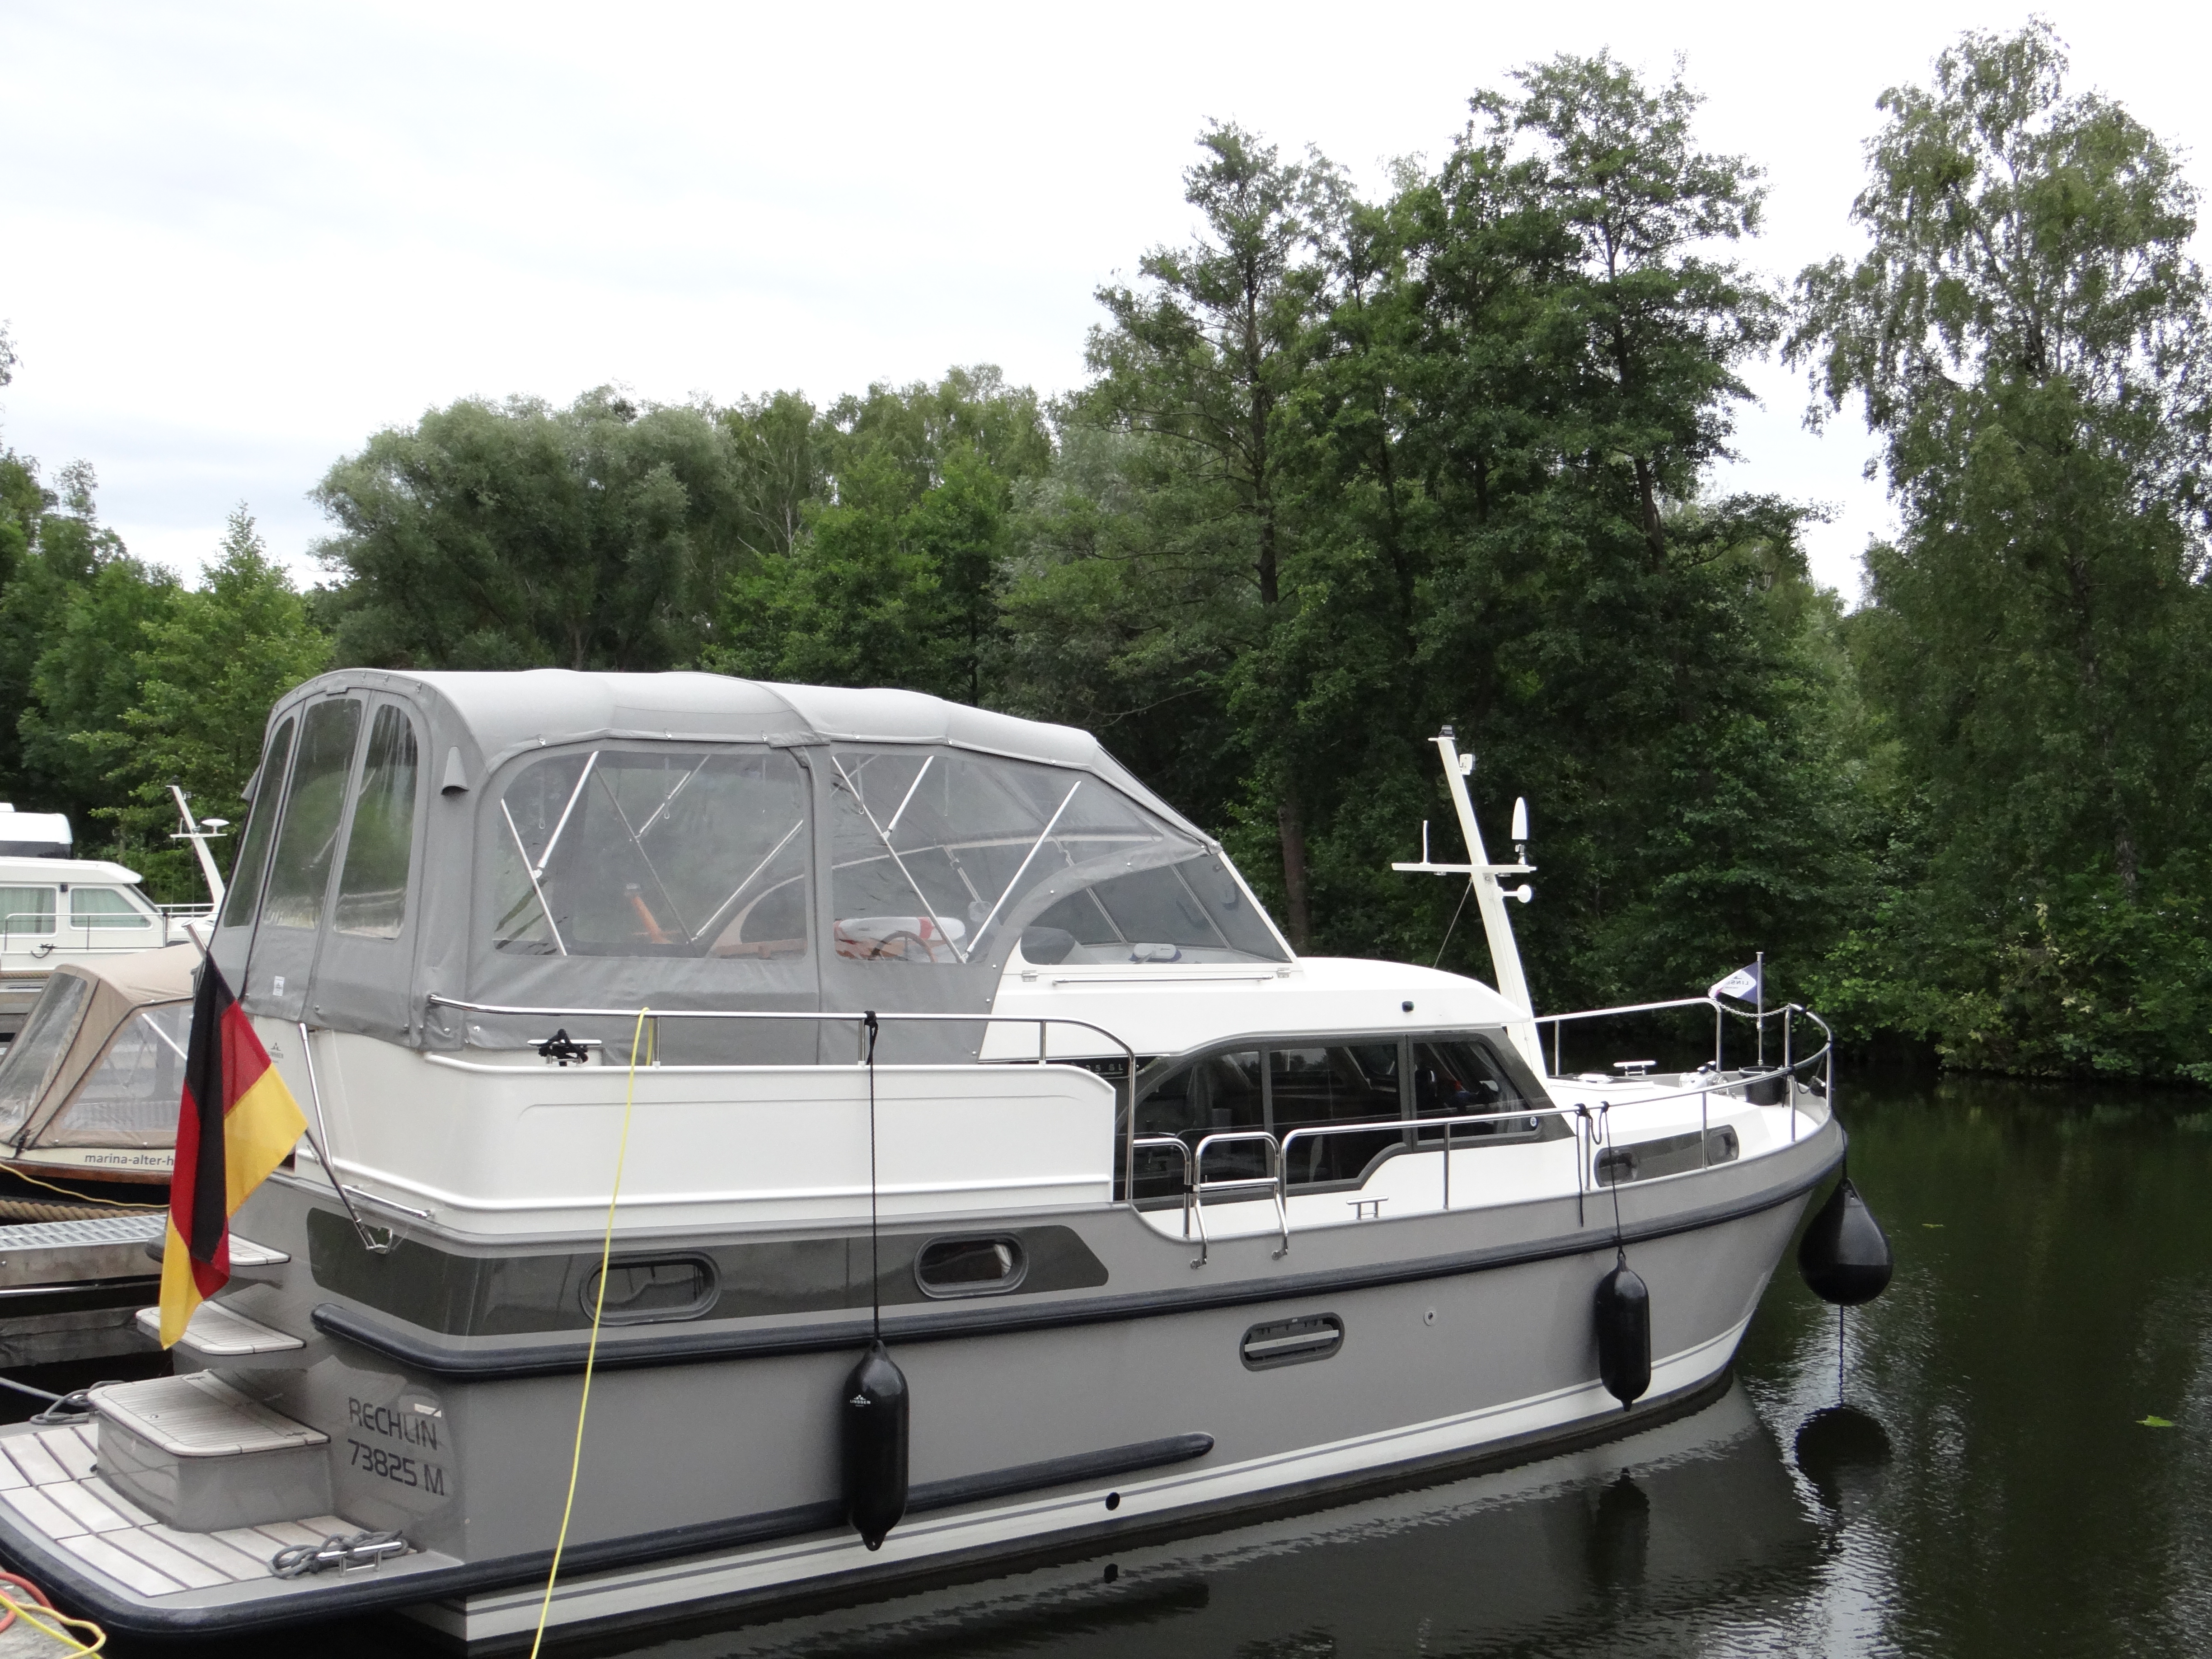 Linssen 35 SL - Motor Boat Charter Germany & Boat hire in Germany Mirow Jachthafen Mirow 1